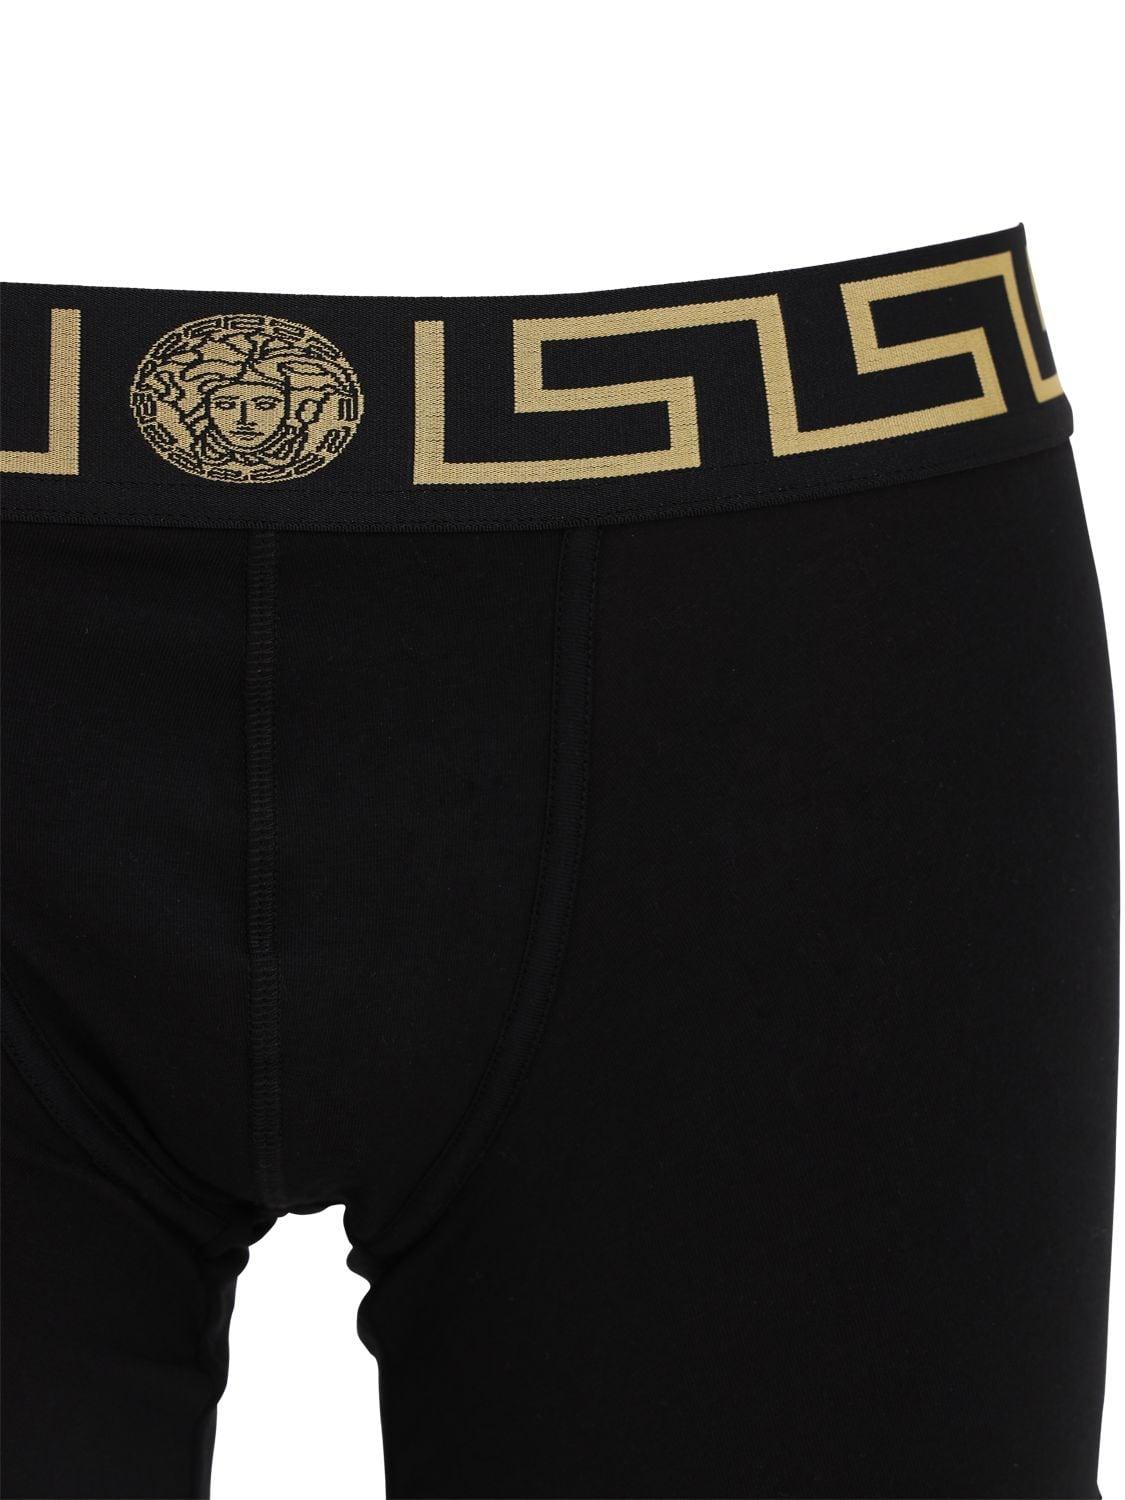 Versace Pack Of 2 Stretch Cotton Boxer Briefs in Black for Men - Lyst